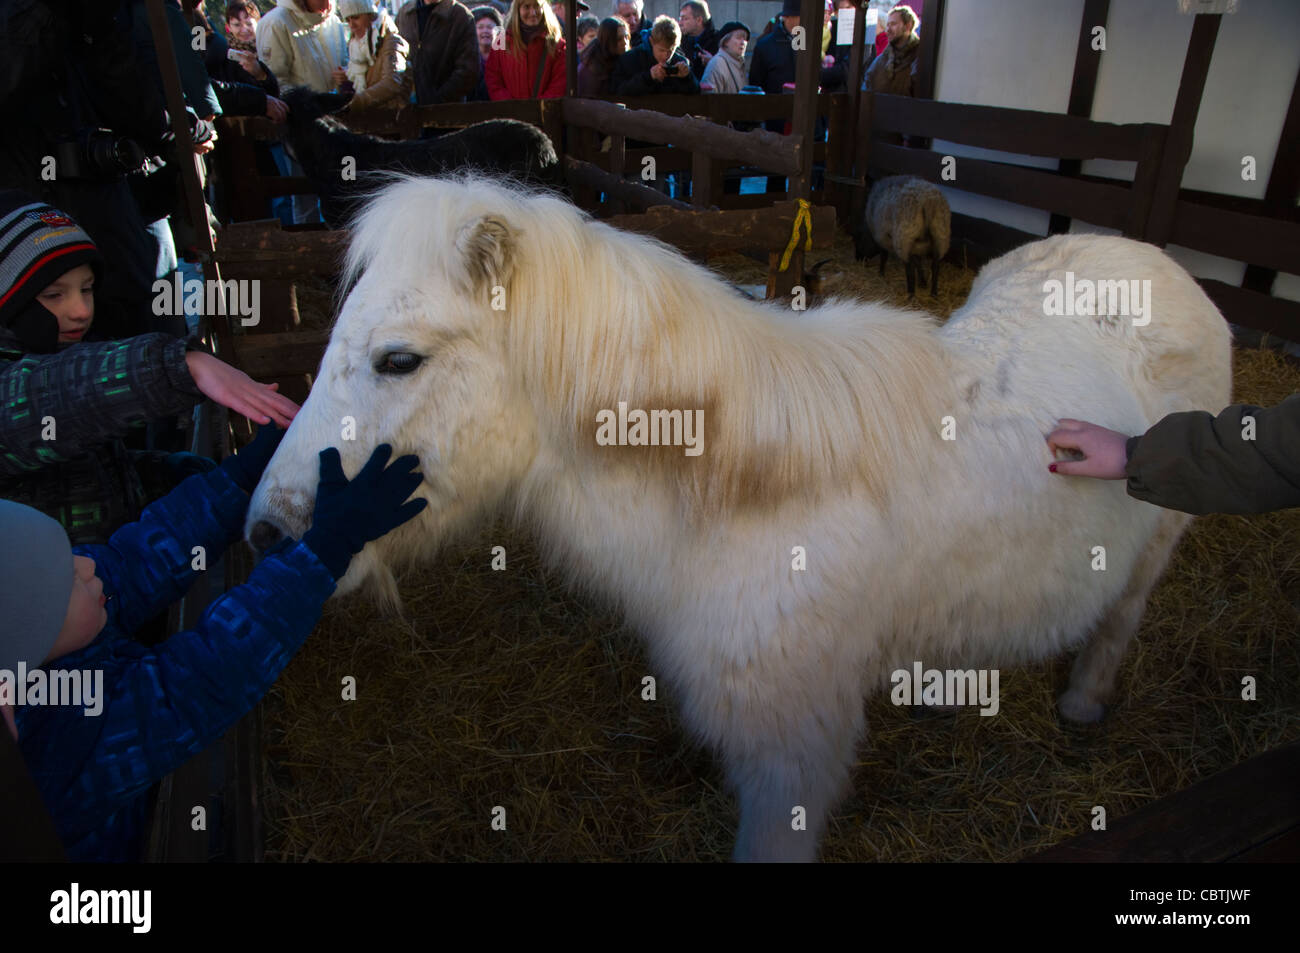 Stall for ponies and sheep during Christmas market at old town square Prague Czech Republic Europe Stock Photo